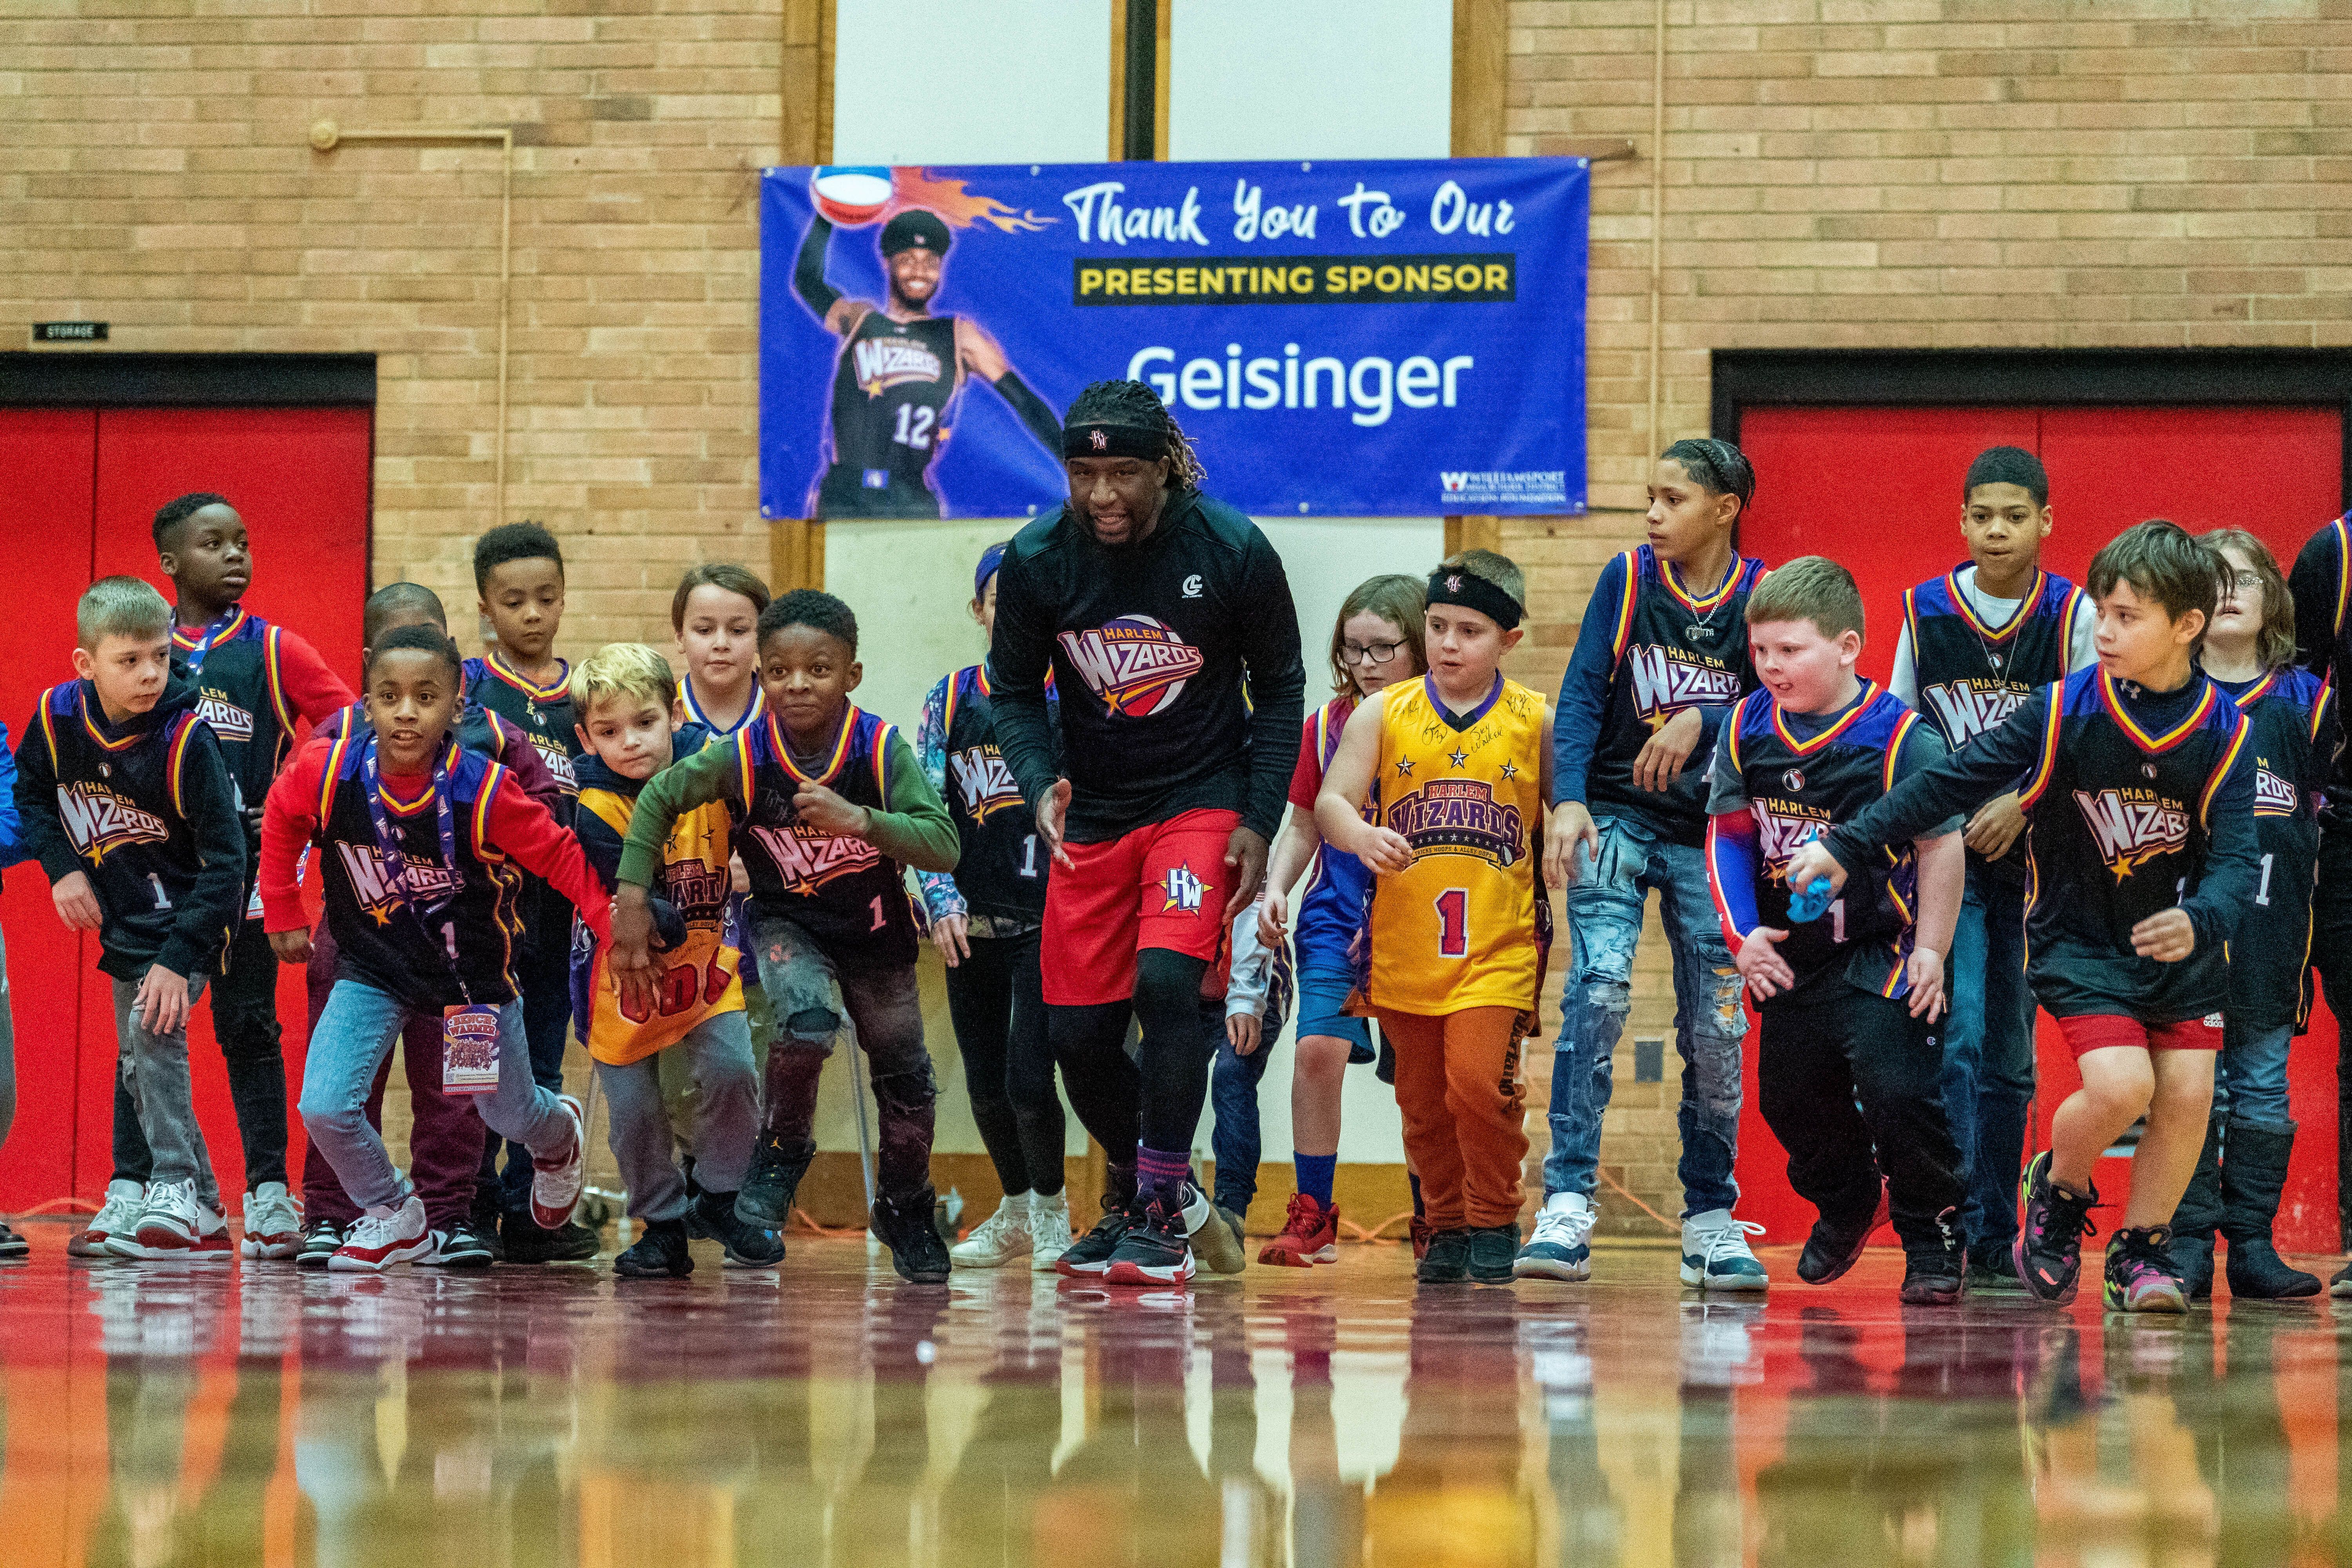 Harlem Wizards Event Raises $20,164 for the WASD Education Foundation